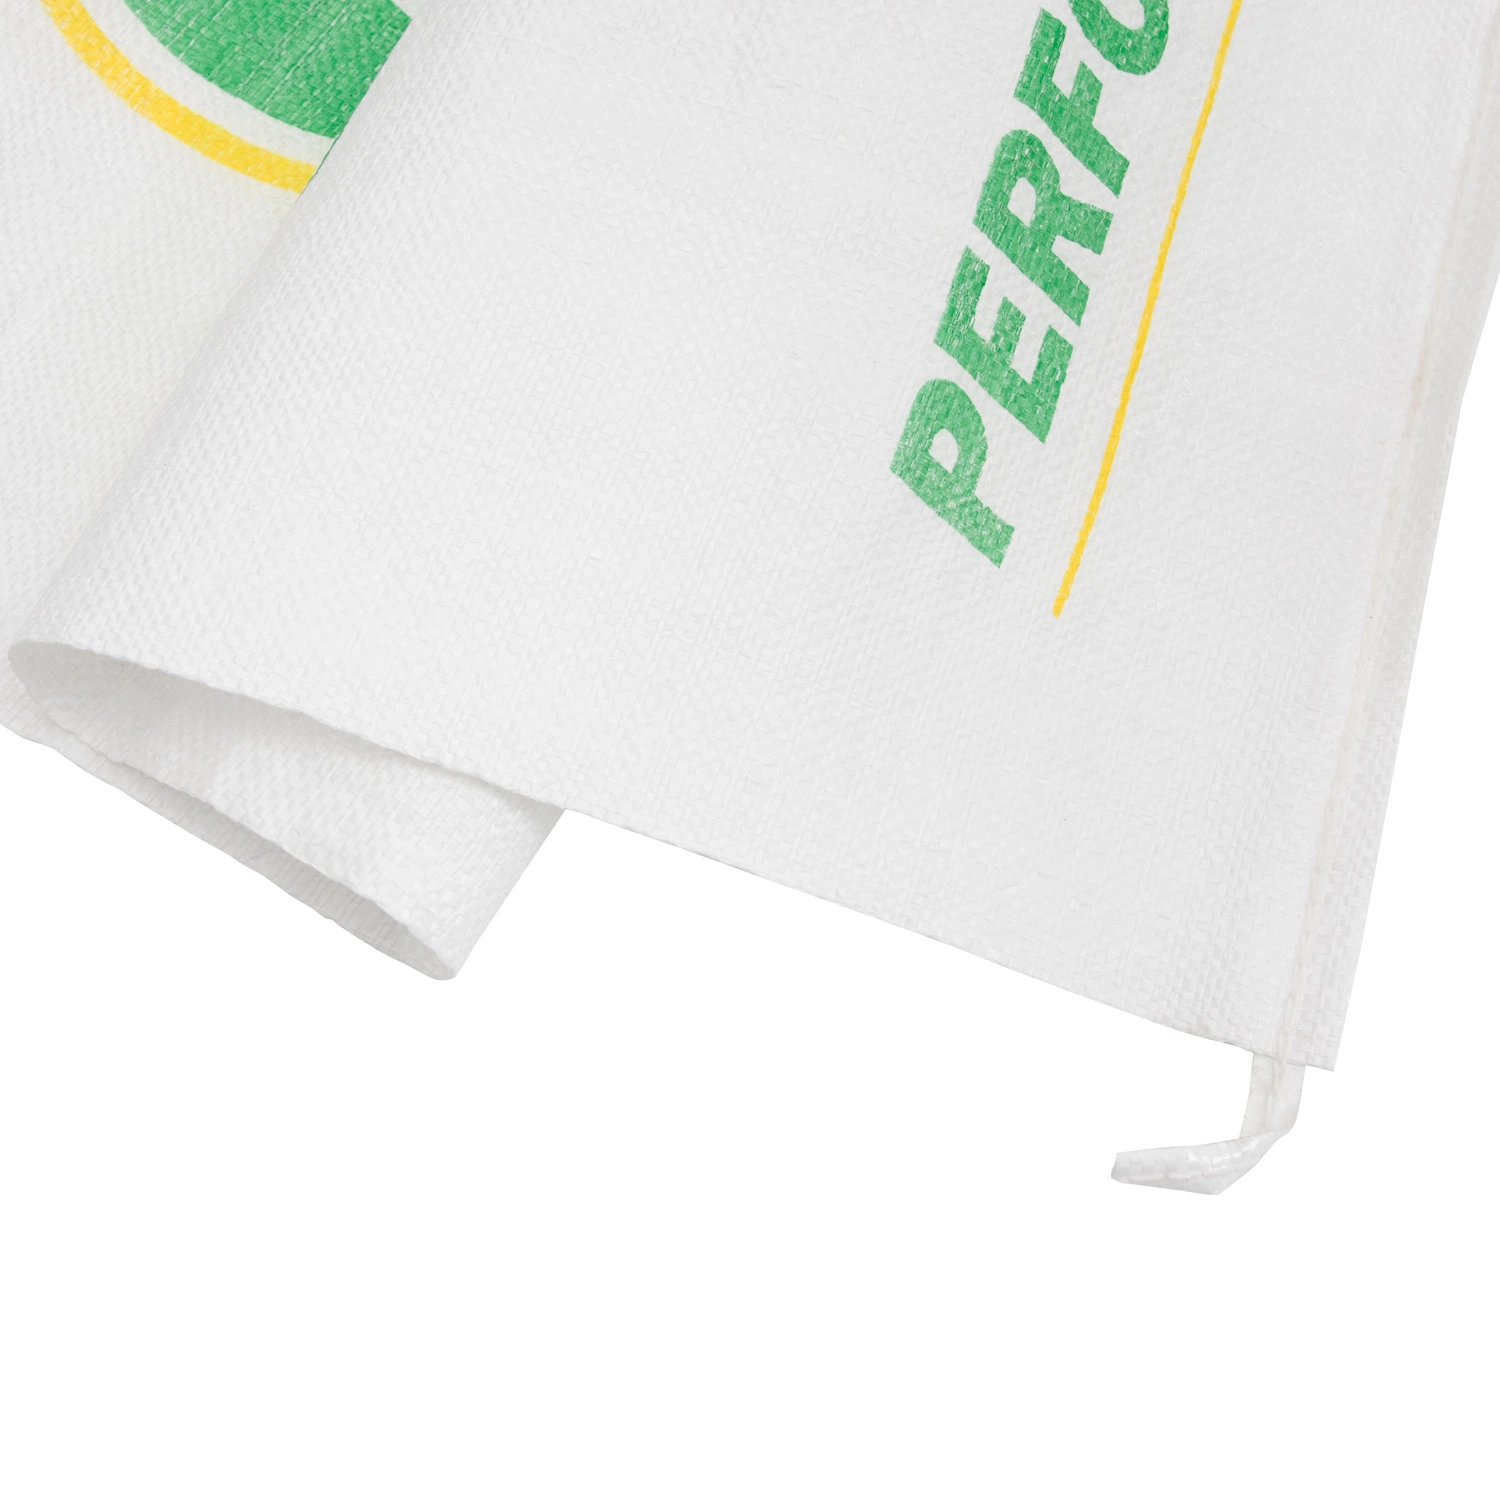 PP Woven Rice Bag 30lbs 50lbs Plastic Sand Cement Packaging Bags Yellow PP Woven Bag Sacks for Chemical Fertilizer